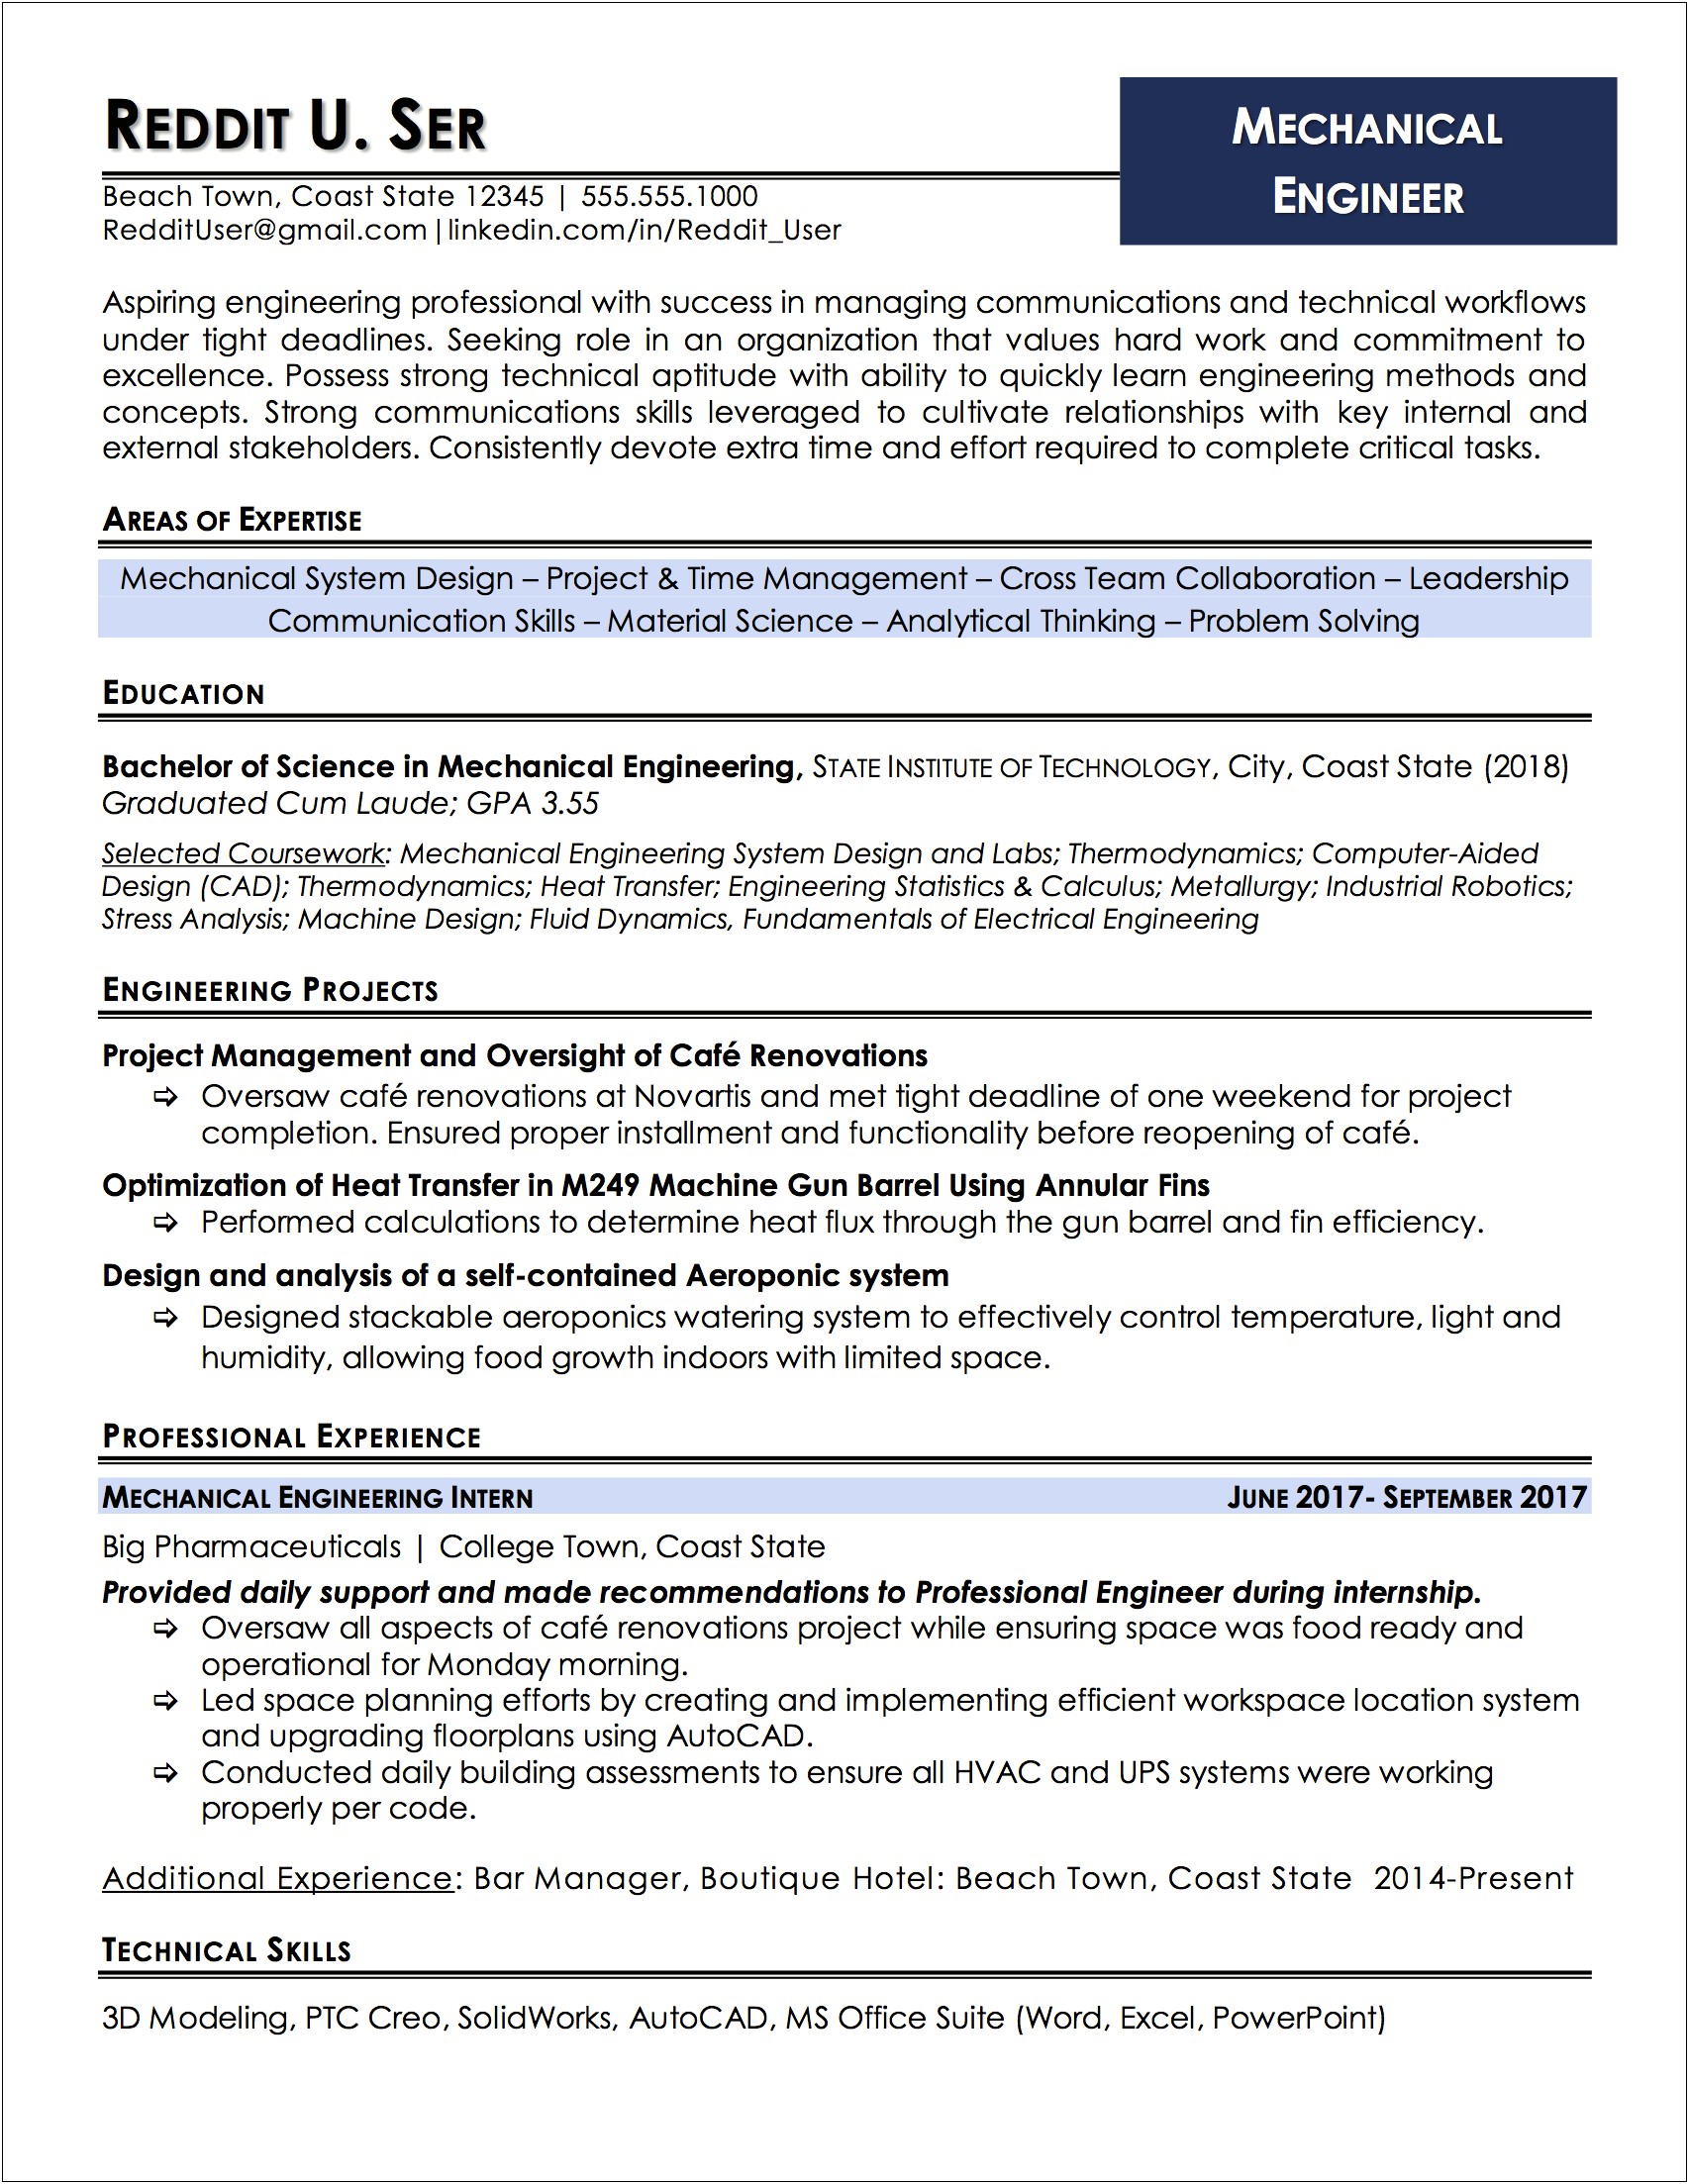 Resume Examples For Entry Level Mechanical Engineers